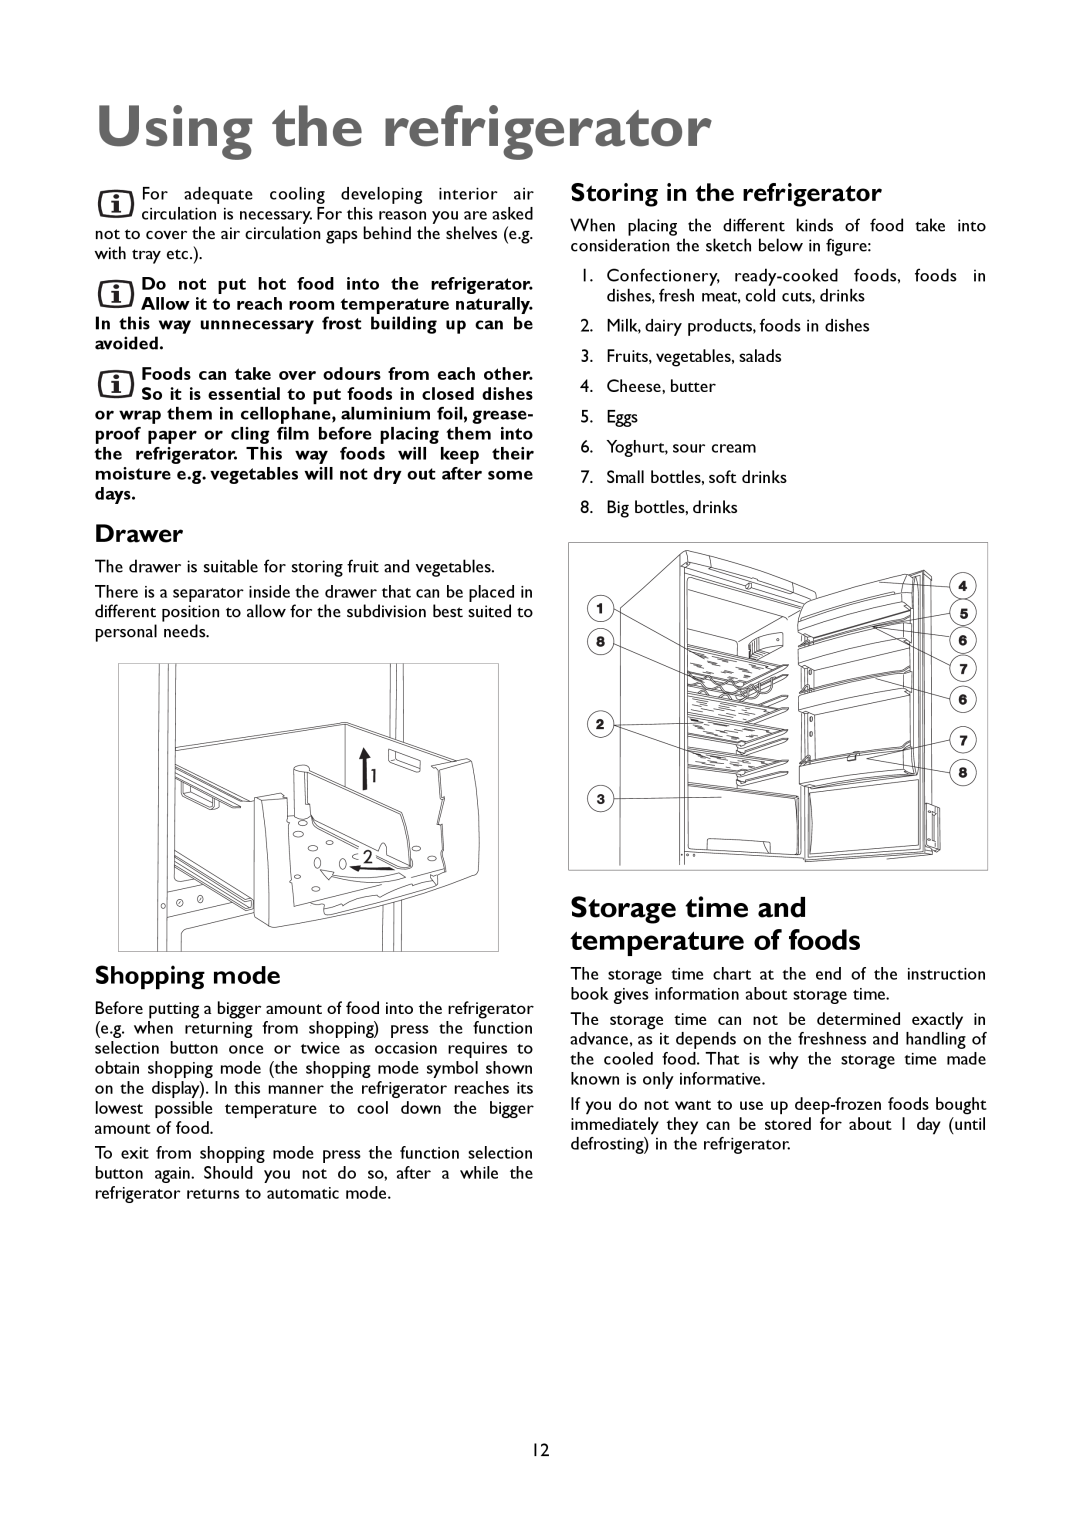 John Lewis JLFFW2004 Using the refrigerator, Storage time and temperature of foods, Storing in the refrigerator, Drawer 